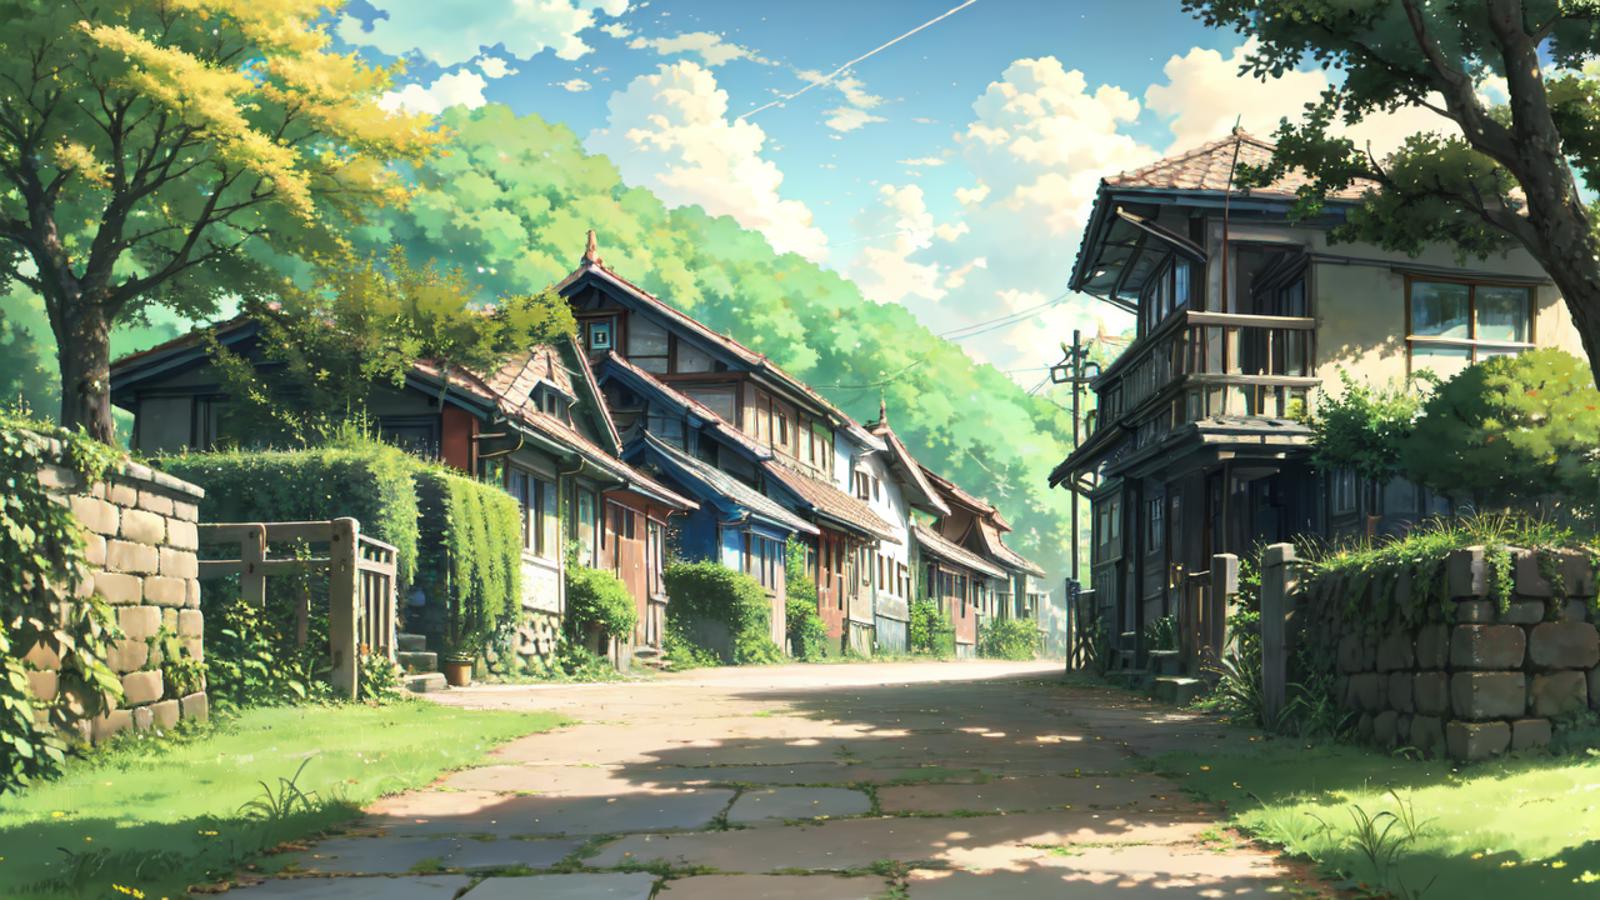 Detailed Places - Anime - Style image by ImJohnJohn